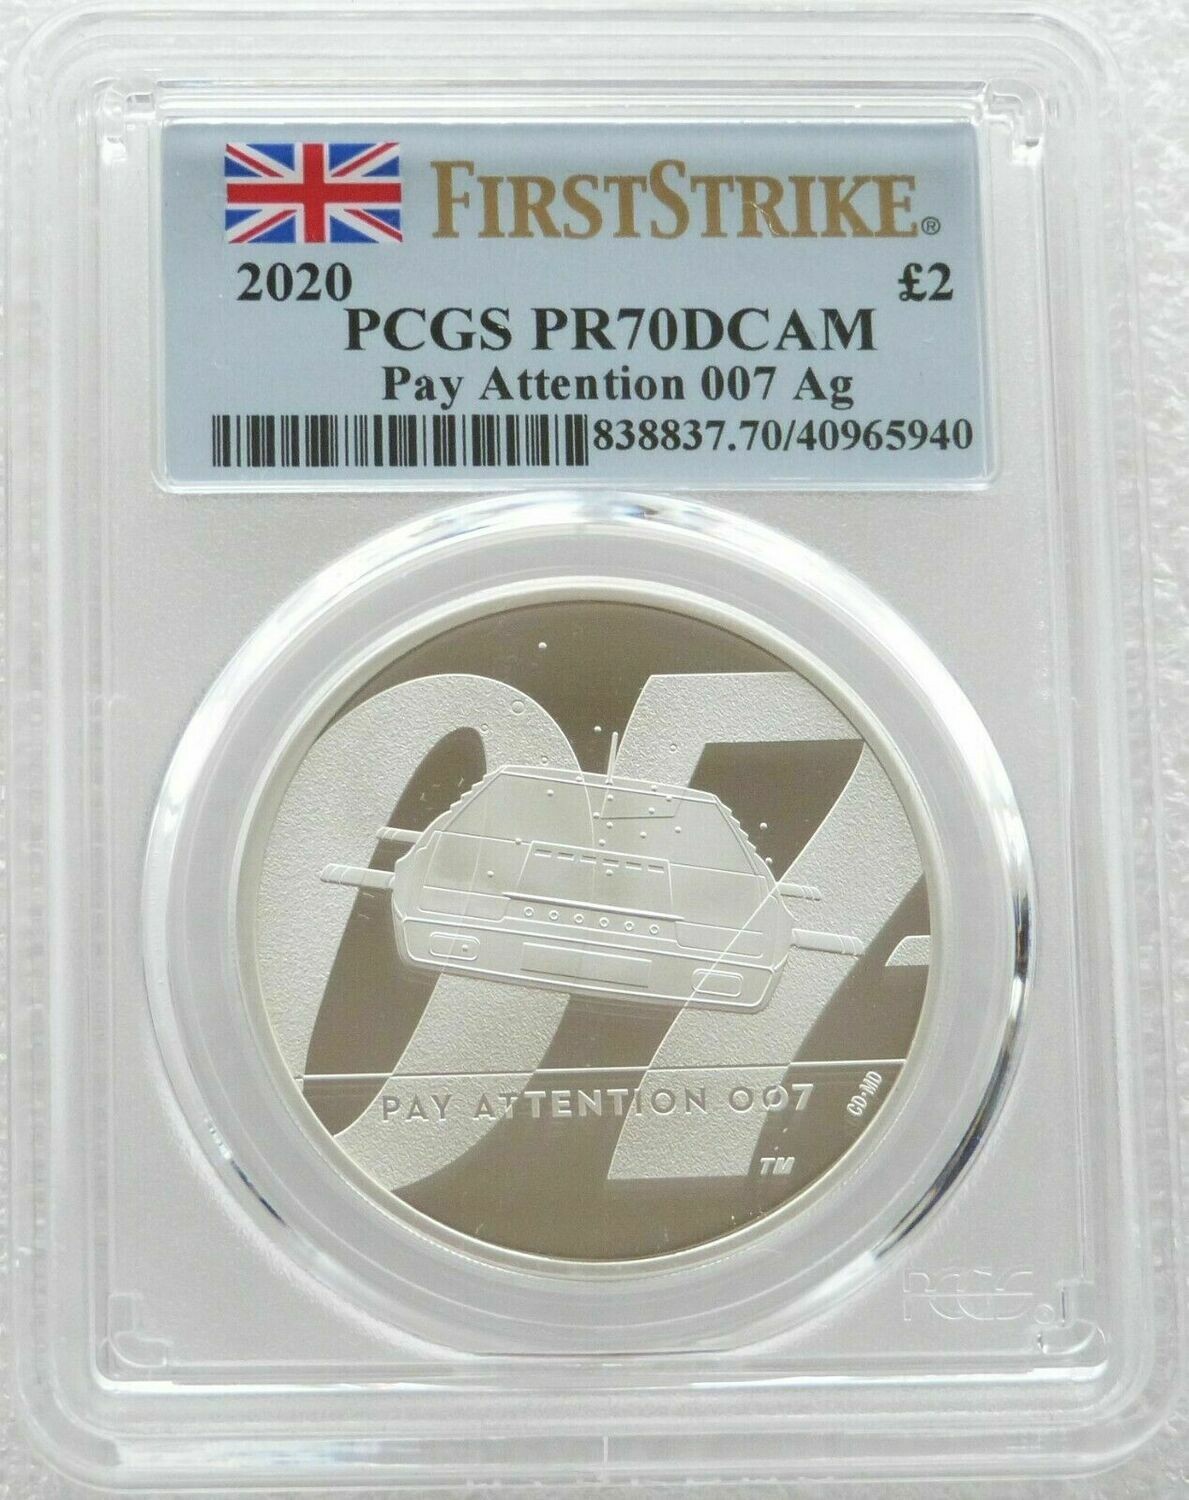 2020 James Bond Pay Attention 007 £2 Silver Proof 1oz Coin PCGS PR70 DCAM First Strike